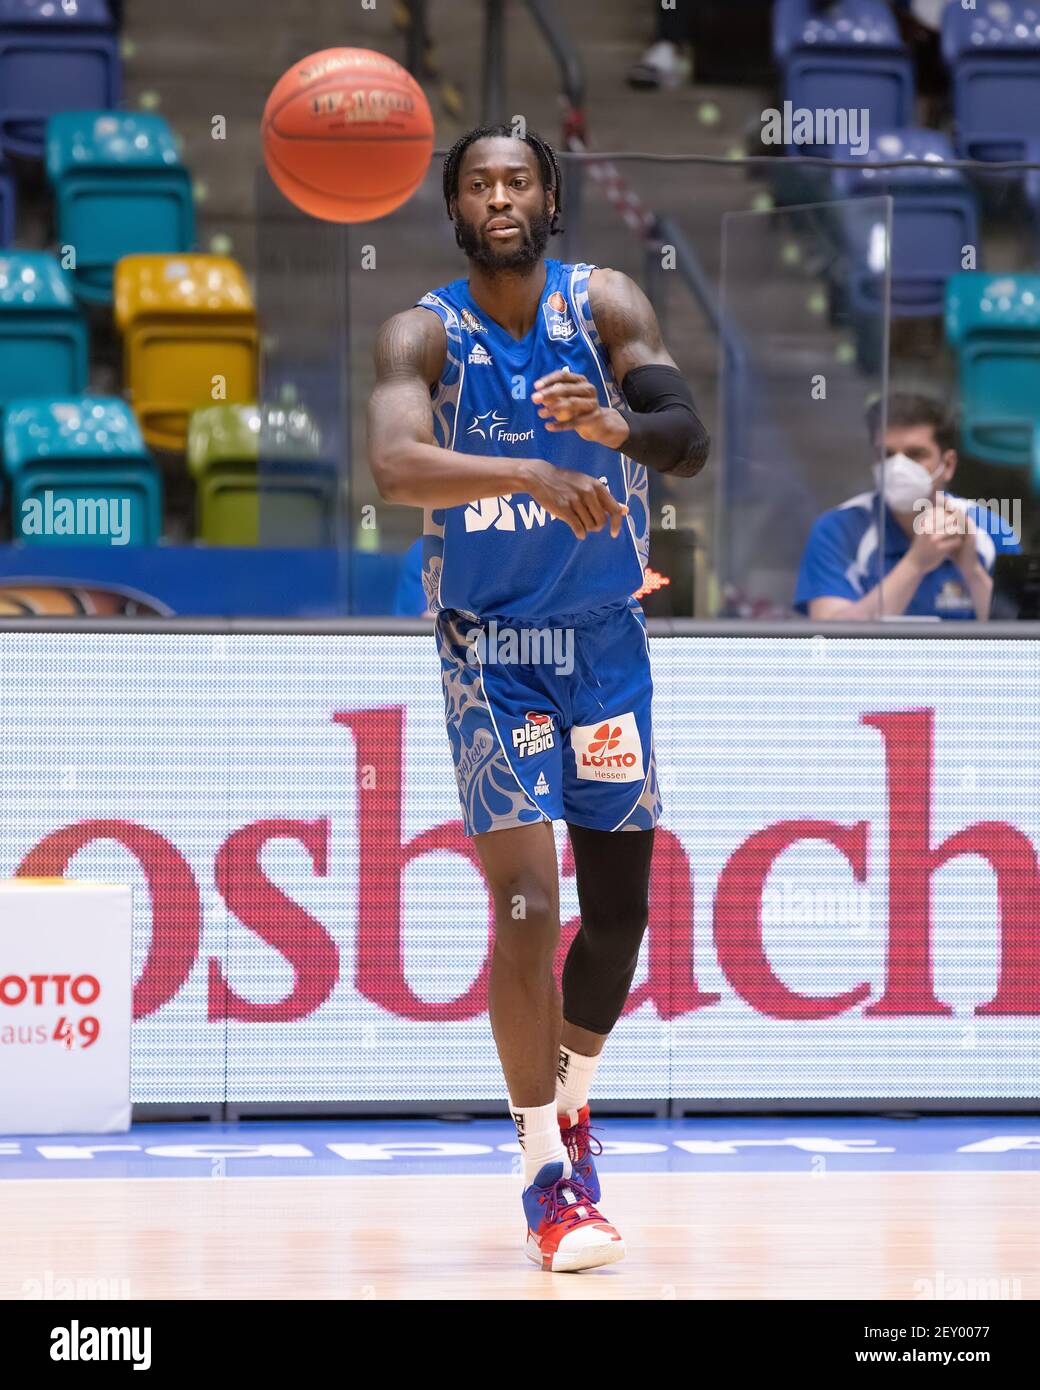 04 March 2021, Hessen, Frankfurt/Main: Matt Mobley (Fraport Skyliners, 1).  Basketball game of the easyCredit BBL between the Fraport Skyliners and  RASTA Vechta on March 4, 2021 at the Fraport Arena in